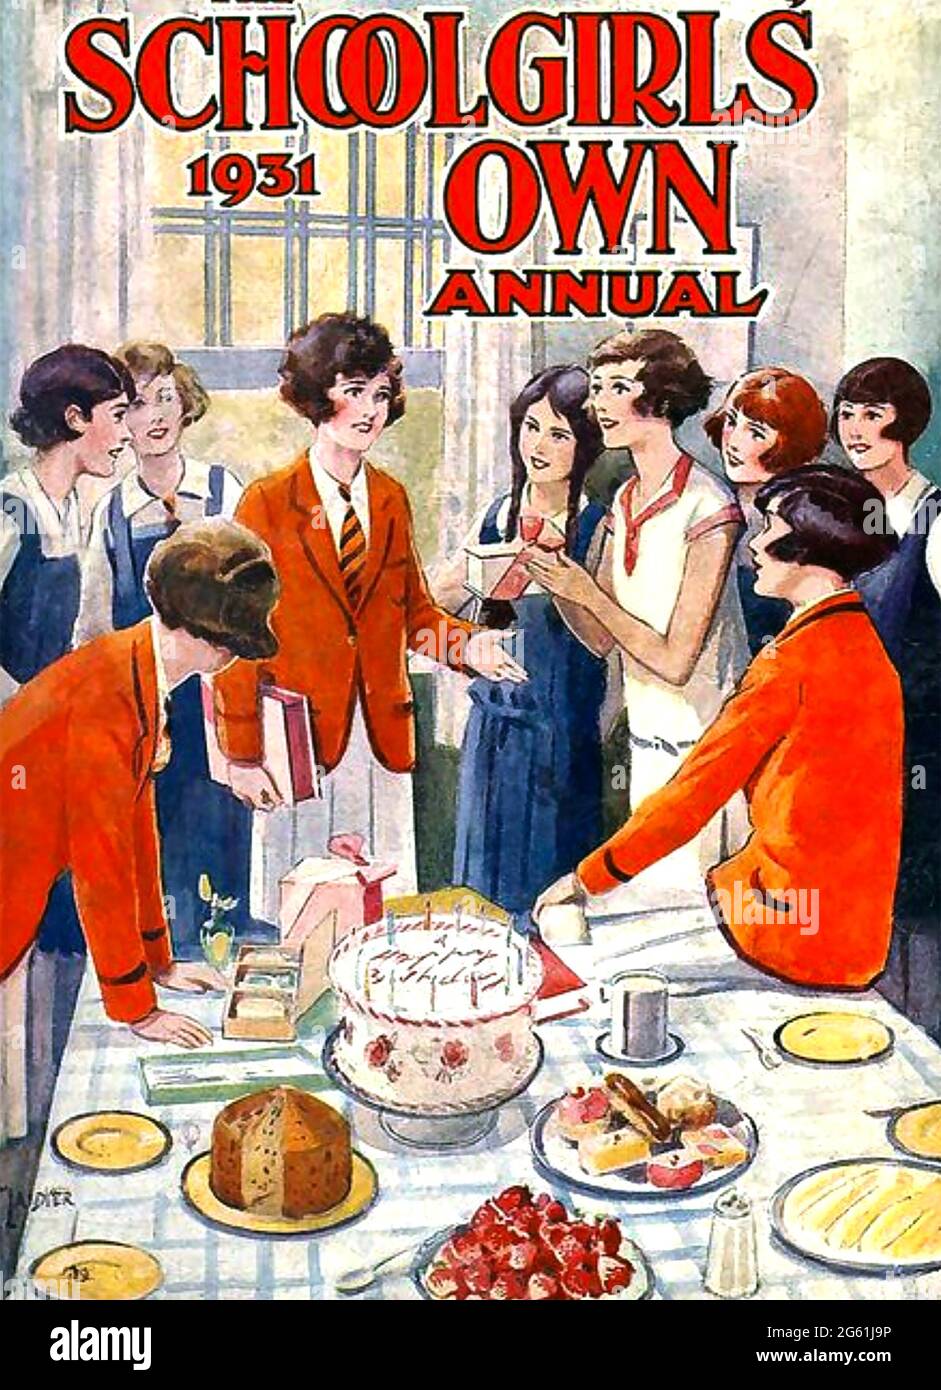 SCHOOLGIRLS' OWN ANNUAL 1931. Schoolgirls' Own was an English weekly story paper published by Amalgamated Press between 1921 and 1936. The cover illustrates some of the pupils at the high-class Morcove girls' boarding school with their cookery which was an important theme  in the stories. Stock Photo